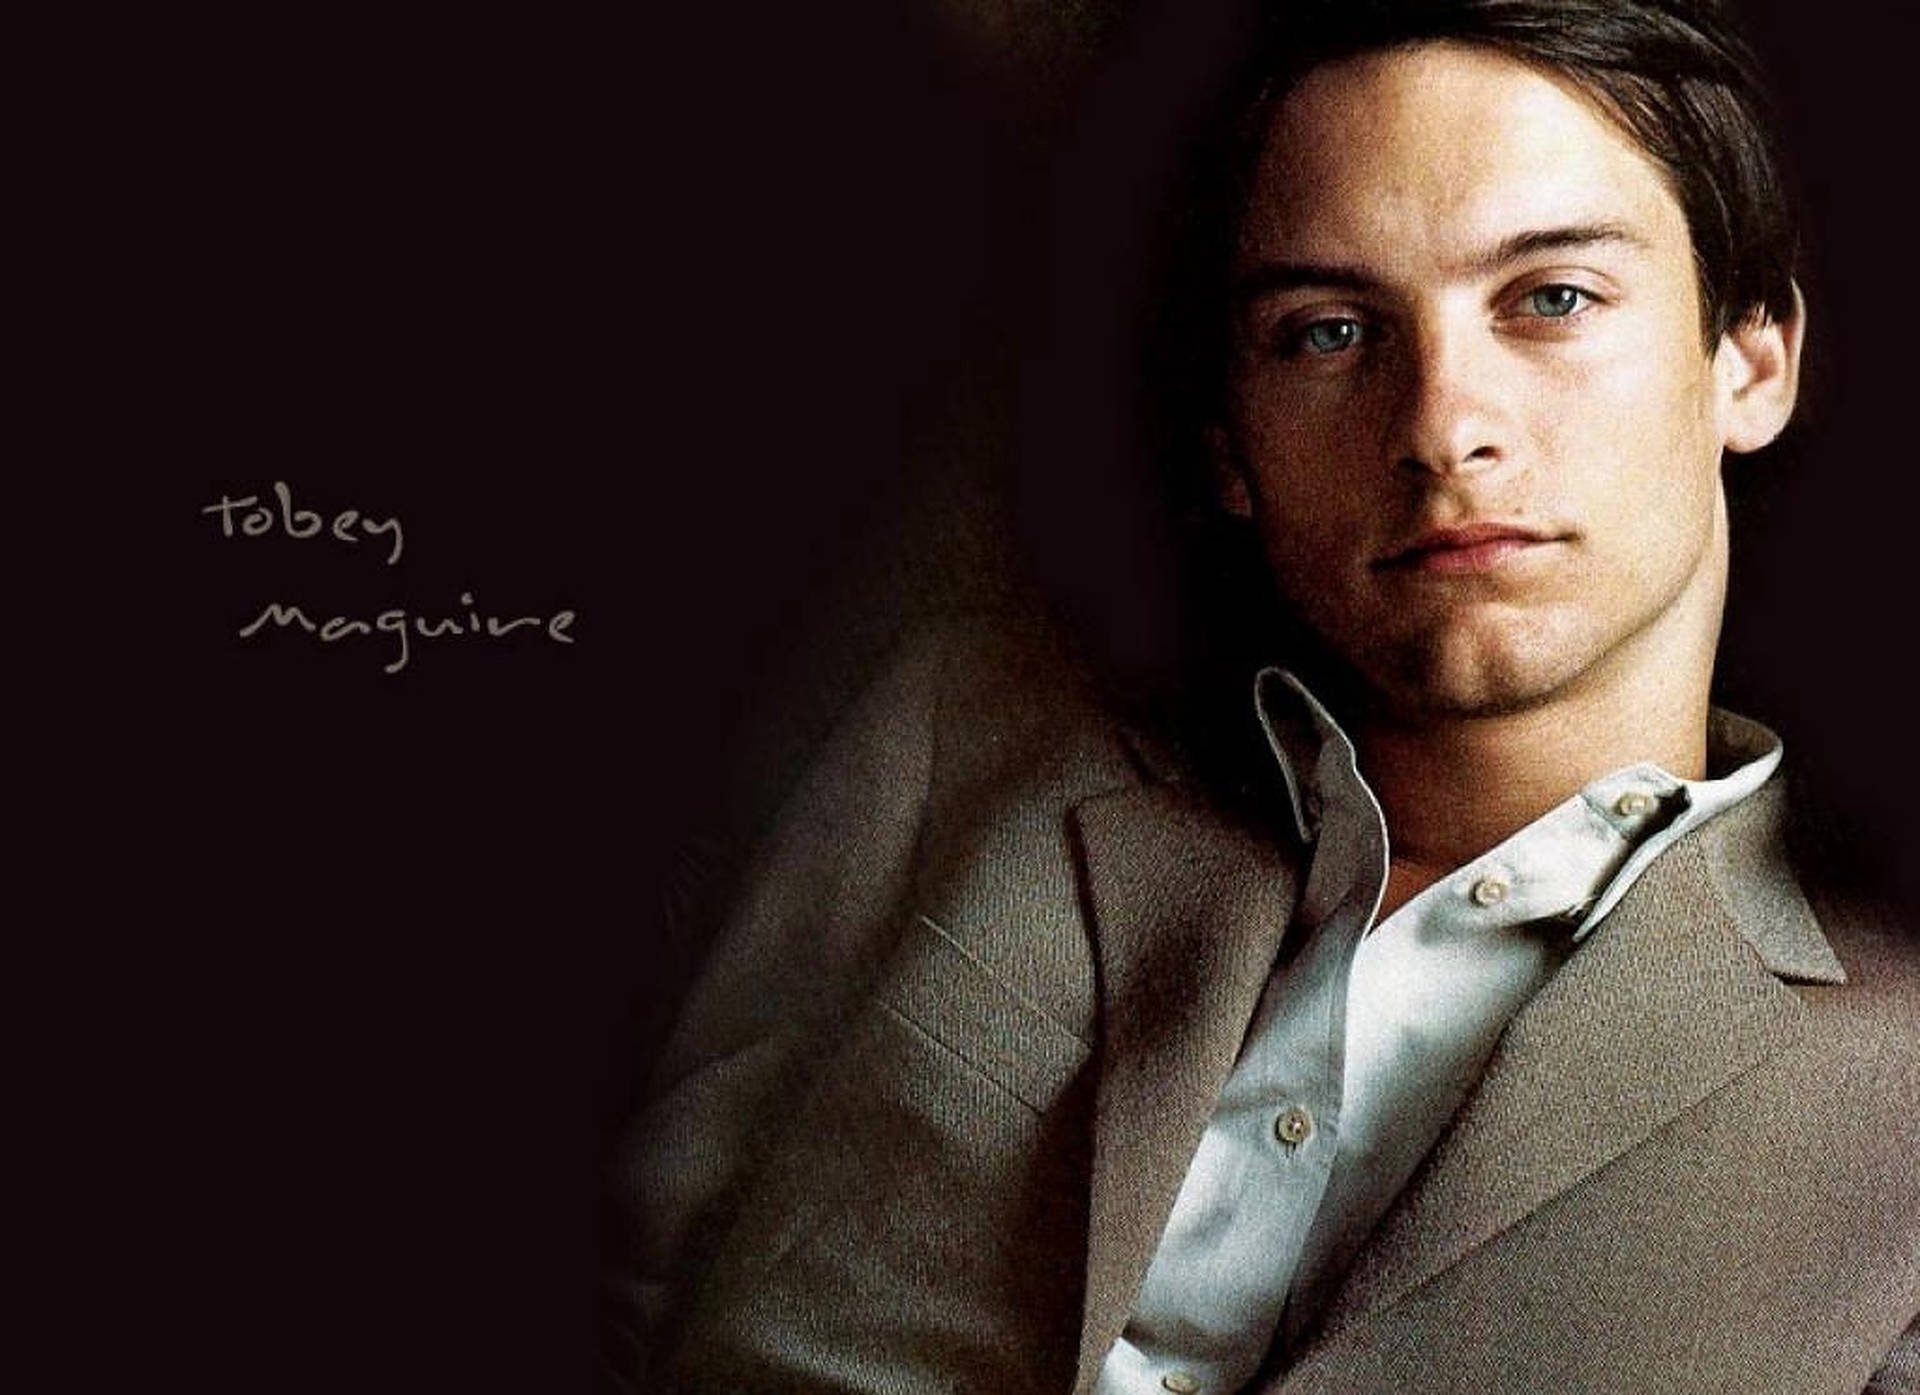 Tobey Maguire Photo Session Background